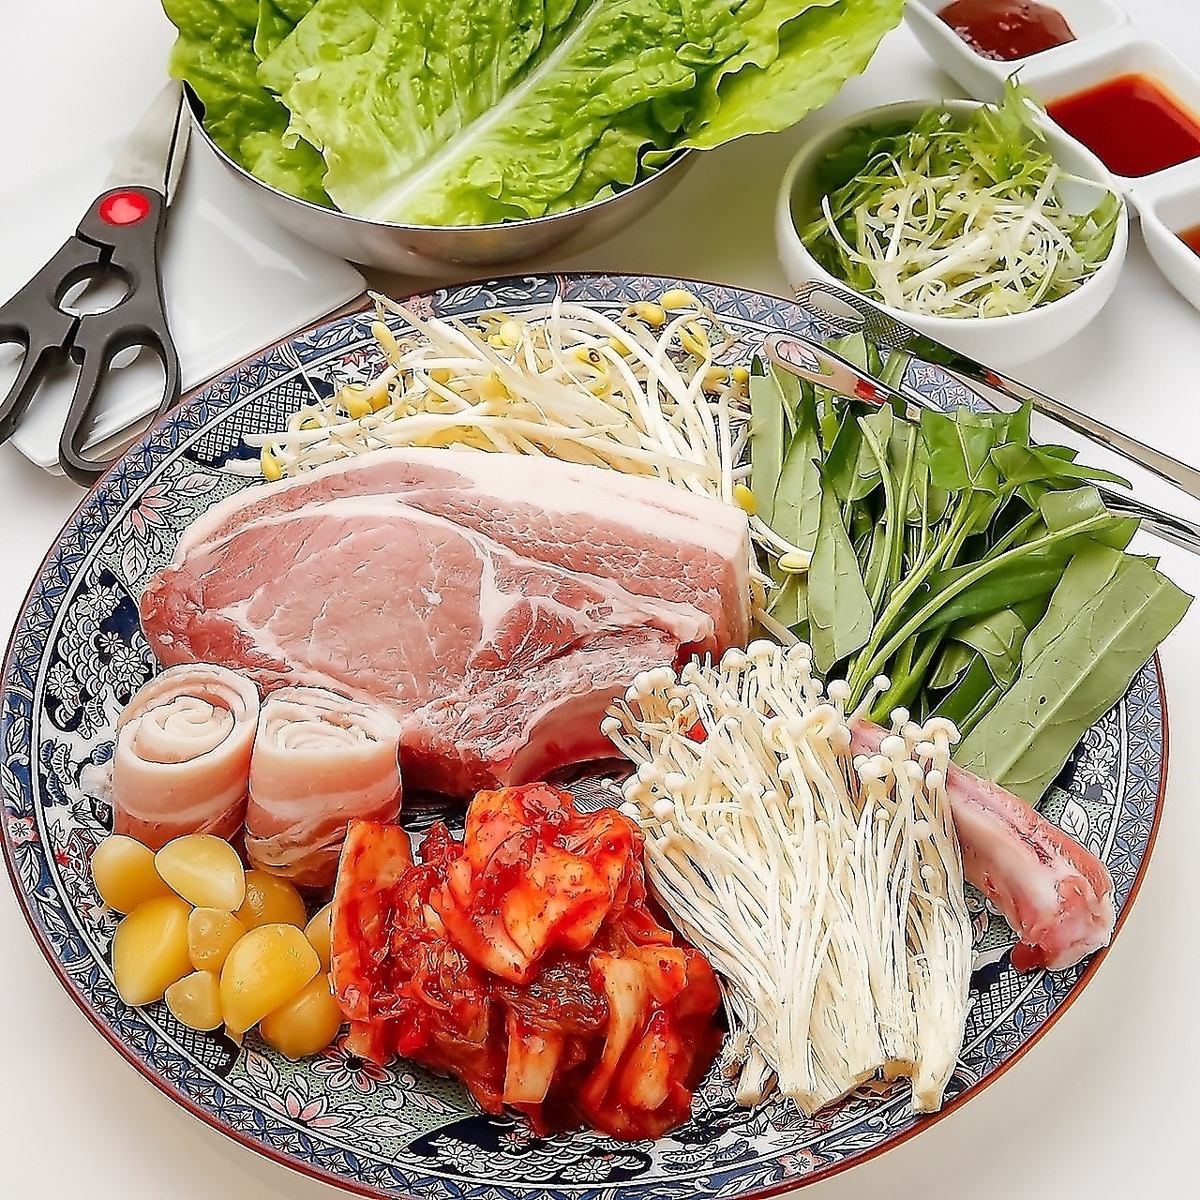 All-you-can-eat plan ★Samgyeopsal set + all-you-can-eat Korean food 2,850 yen